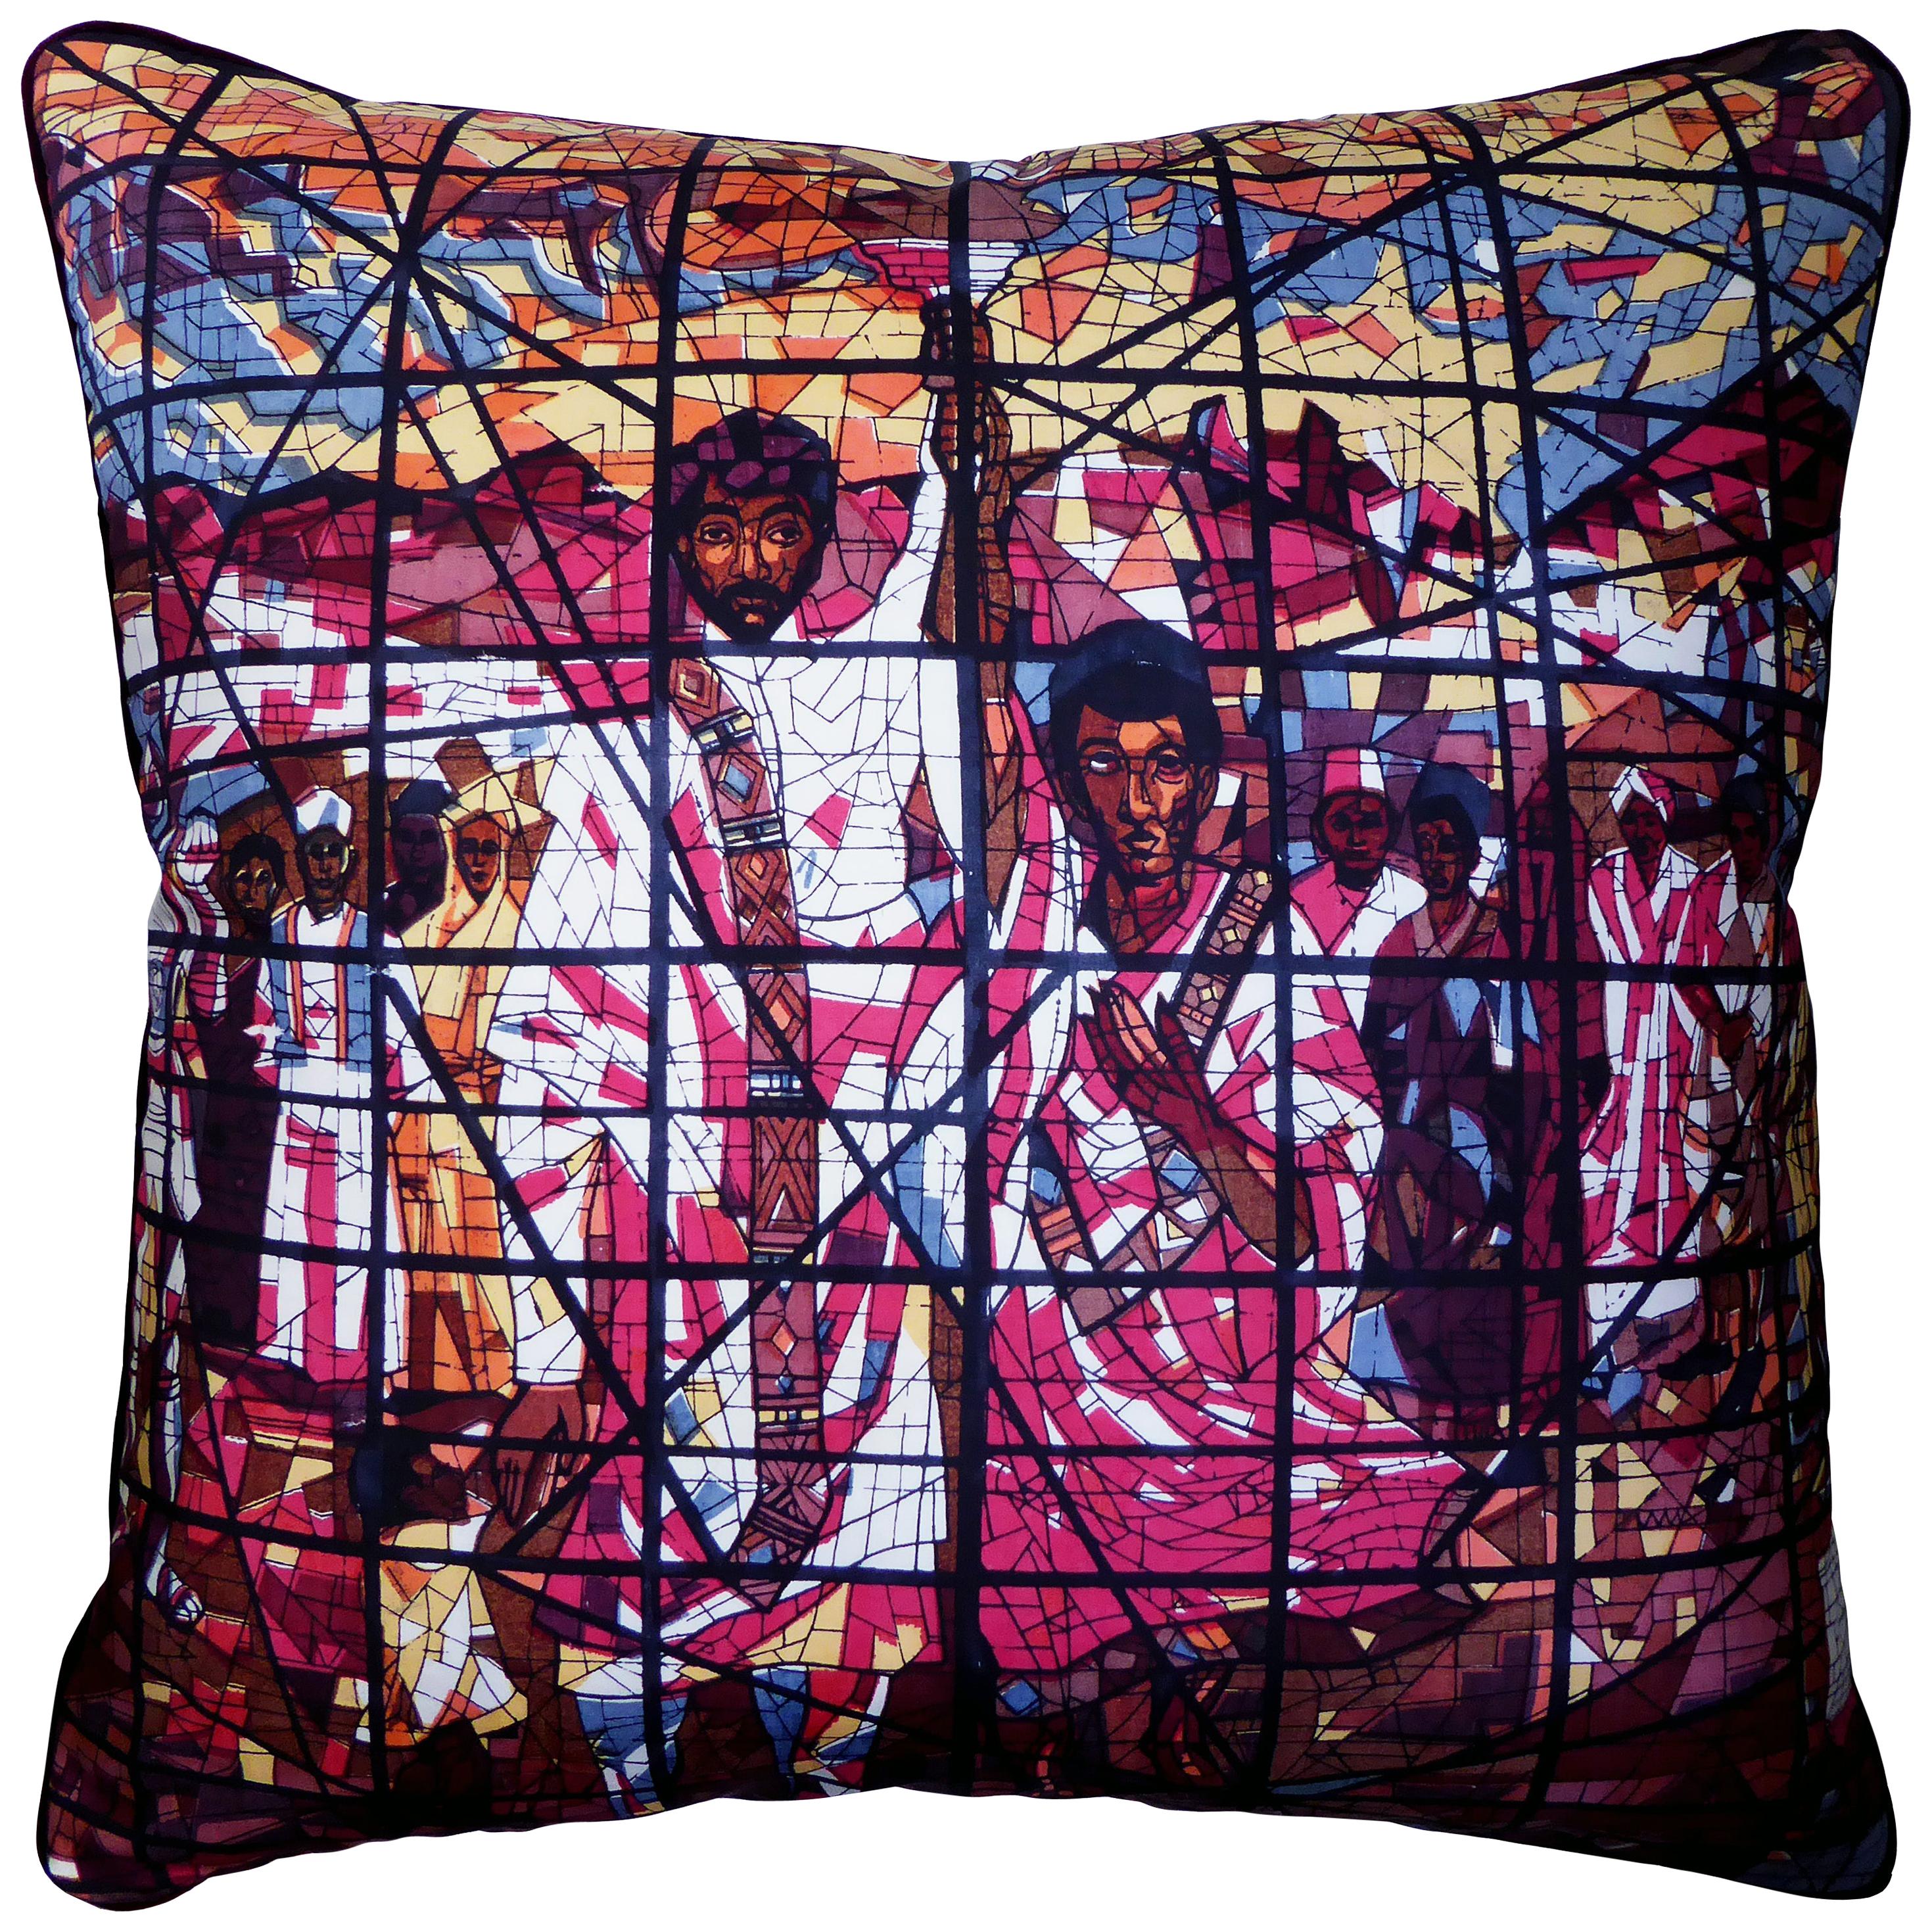 Vintage Cushions Luxury Bespoke Silk Pillow, Stained Glass Window of Africa